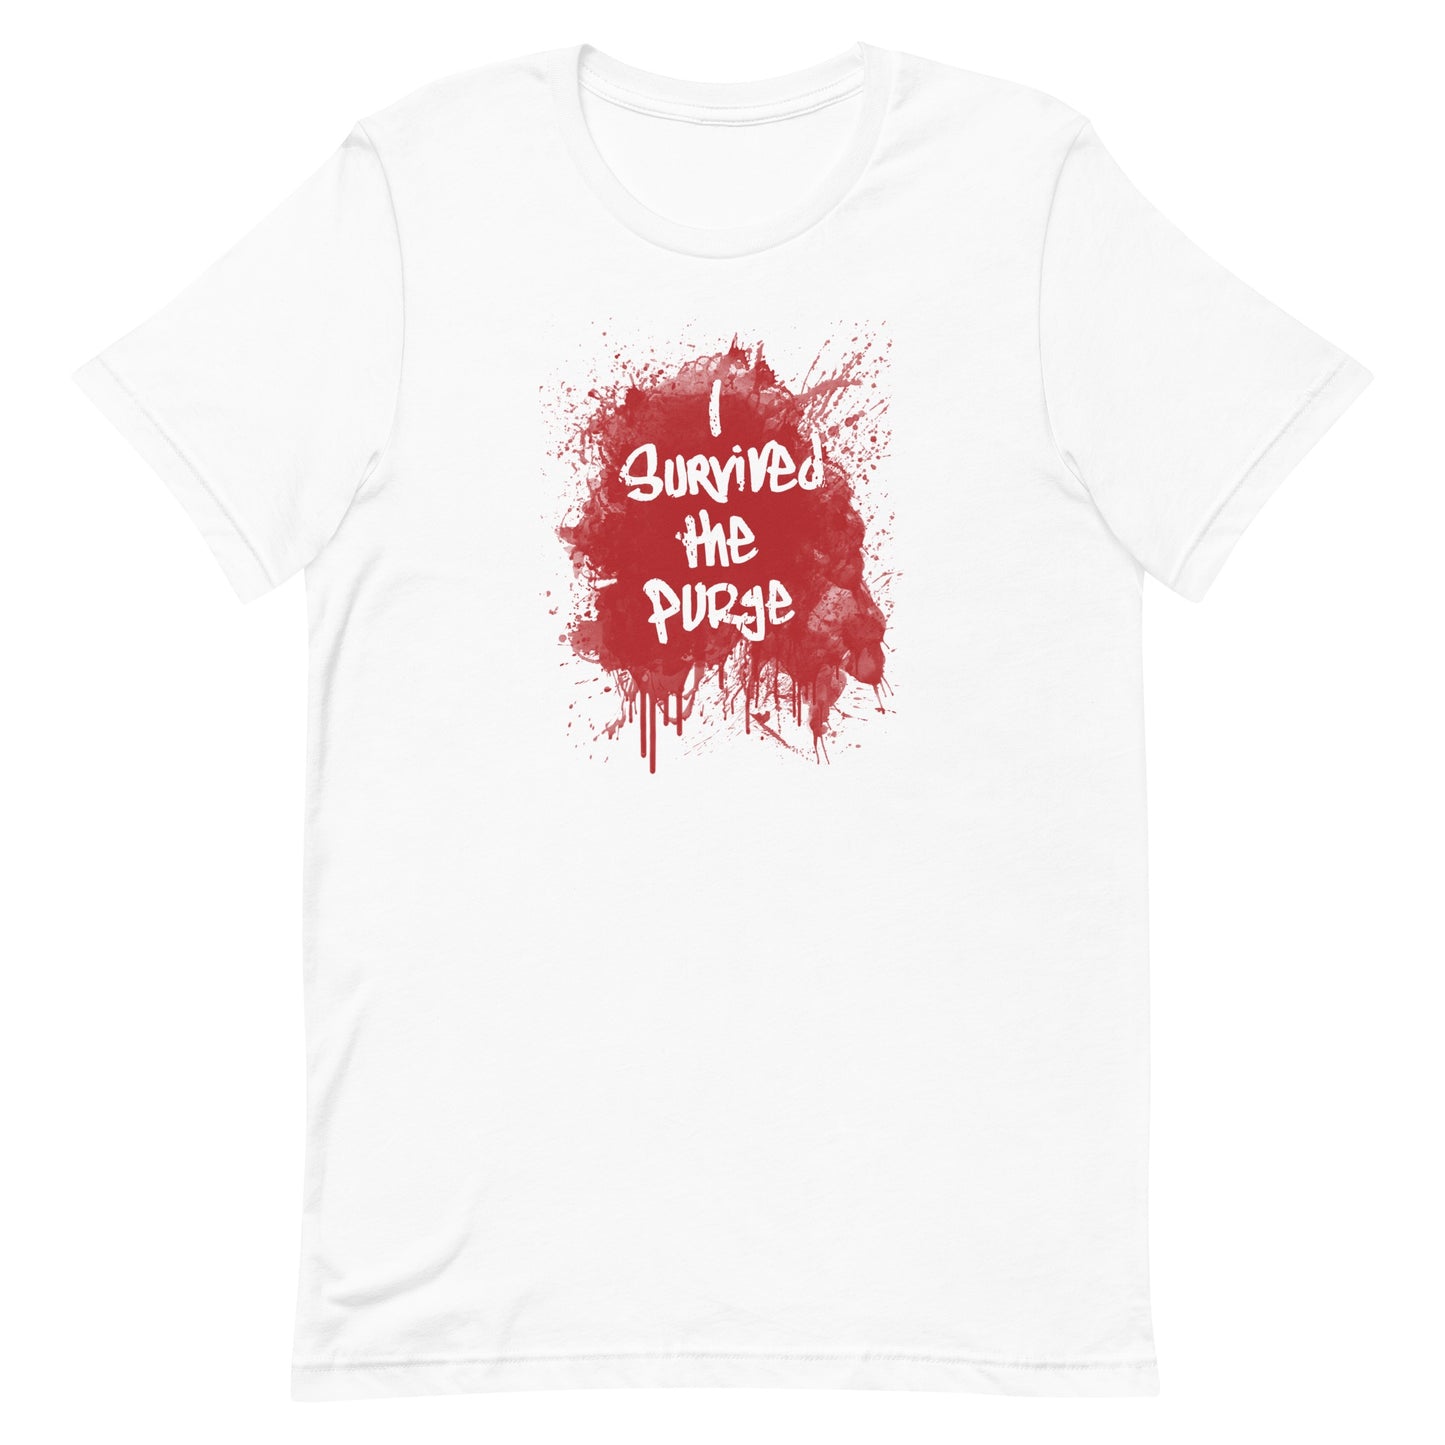 The Purge I Survived The Purge Adult Short Sleeve T-Shirt